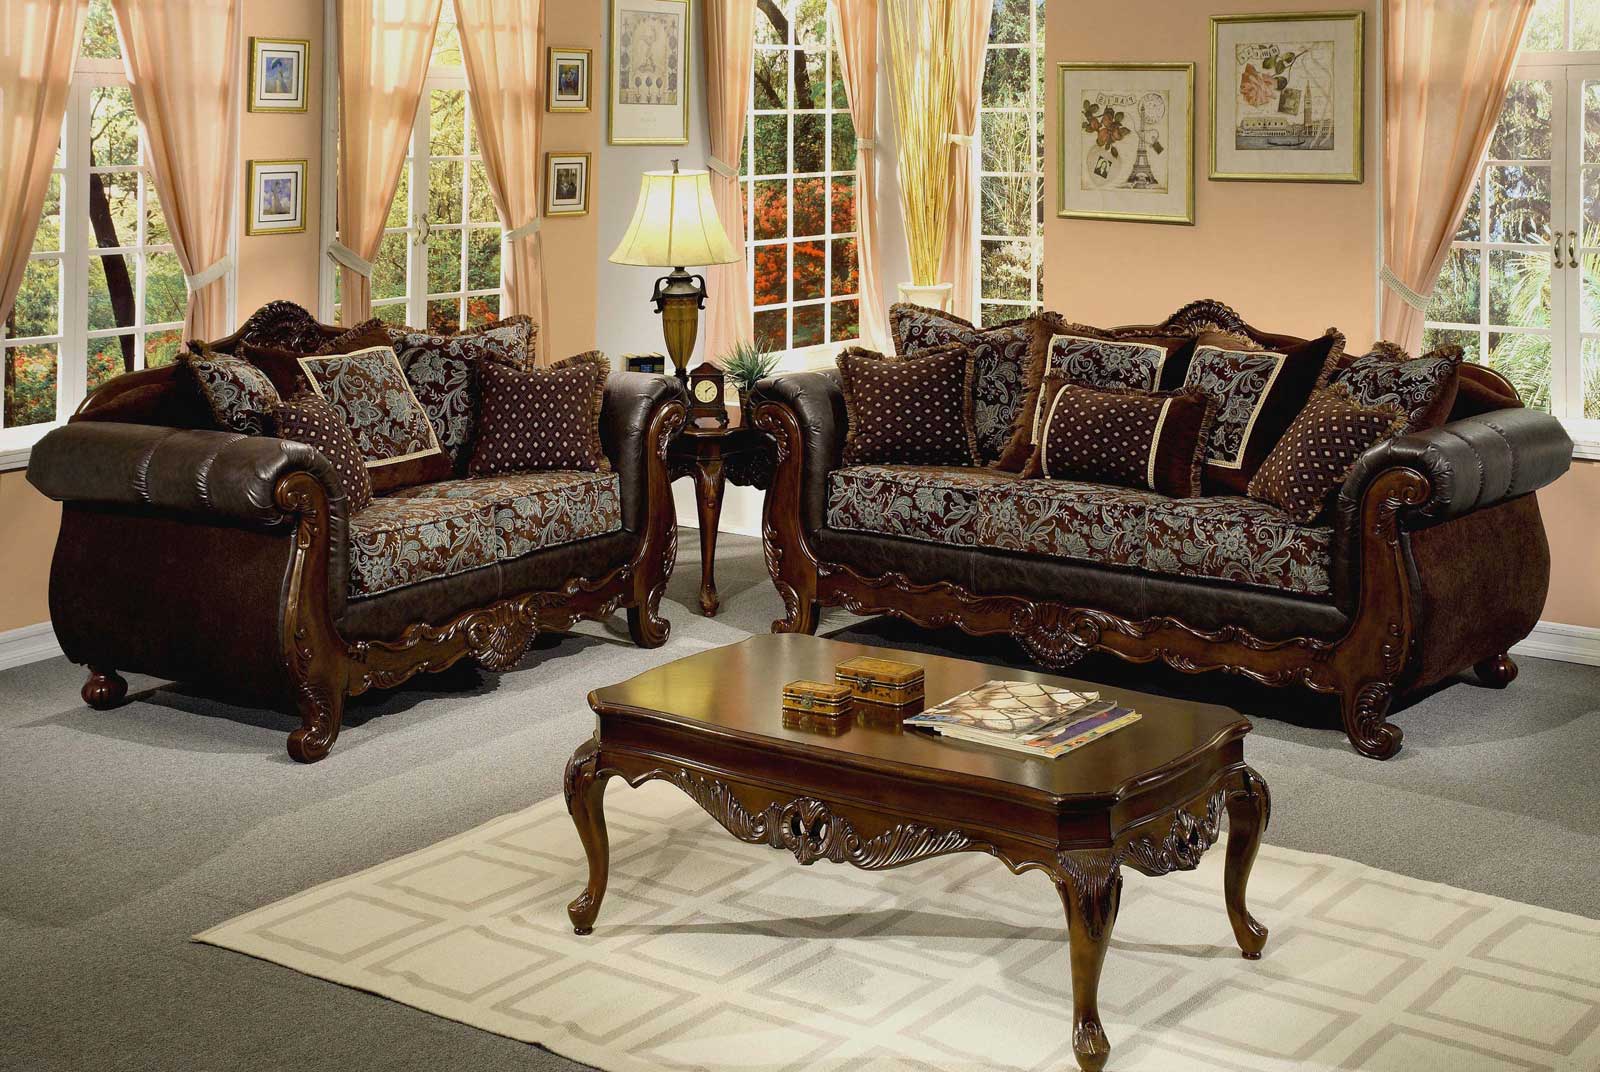 Living Room With Astonishing Living Room Furniture Sets With Elegant Dark Brown Sofas Completed By Cushions Also Furnished With Wooden Table On Rug And Table Lamp On Nightstand The Best Living Room Furniture Sets